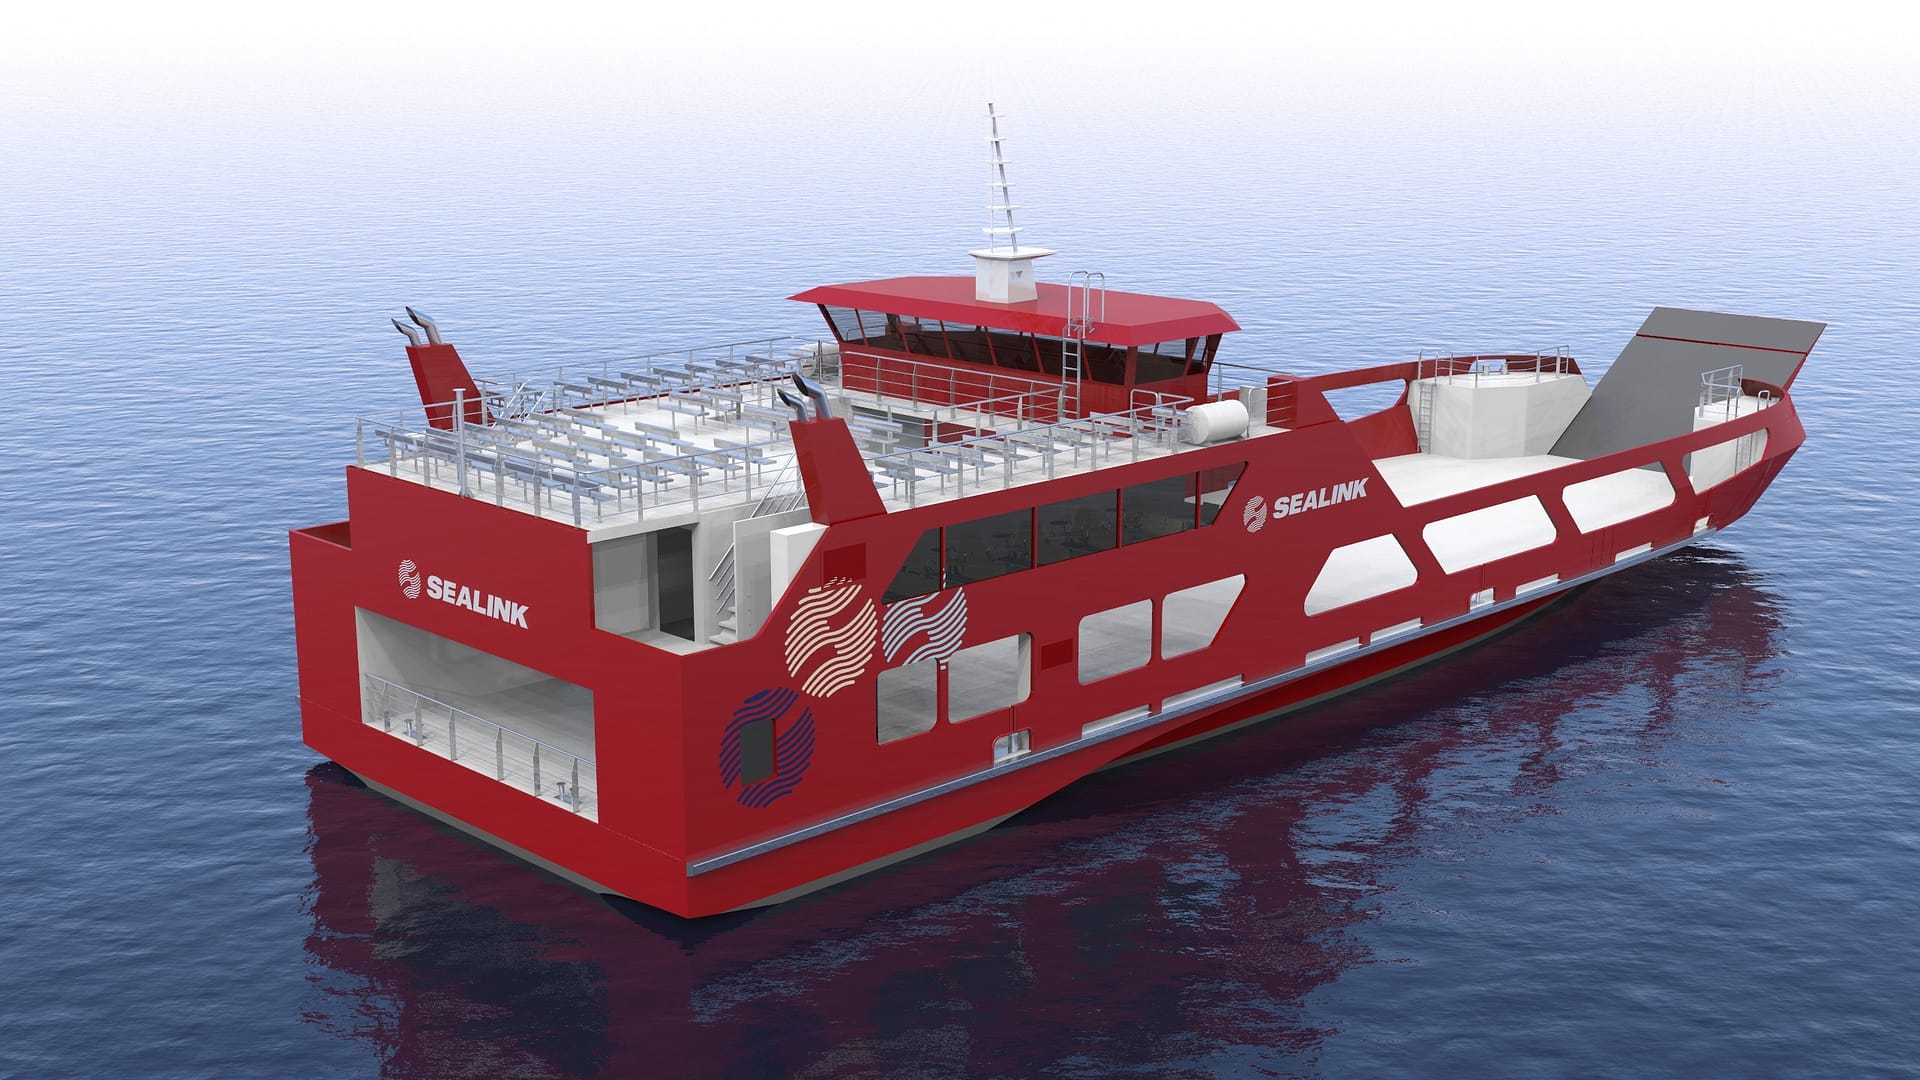 sealink ropax ferry render overall view starboard aft view